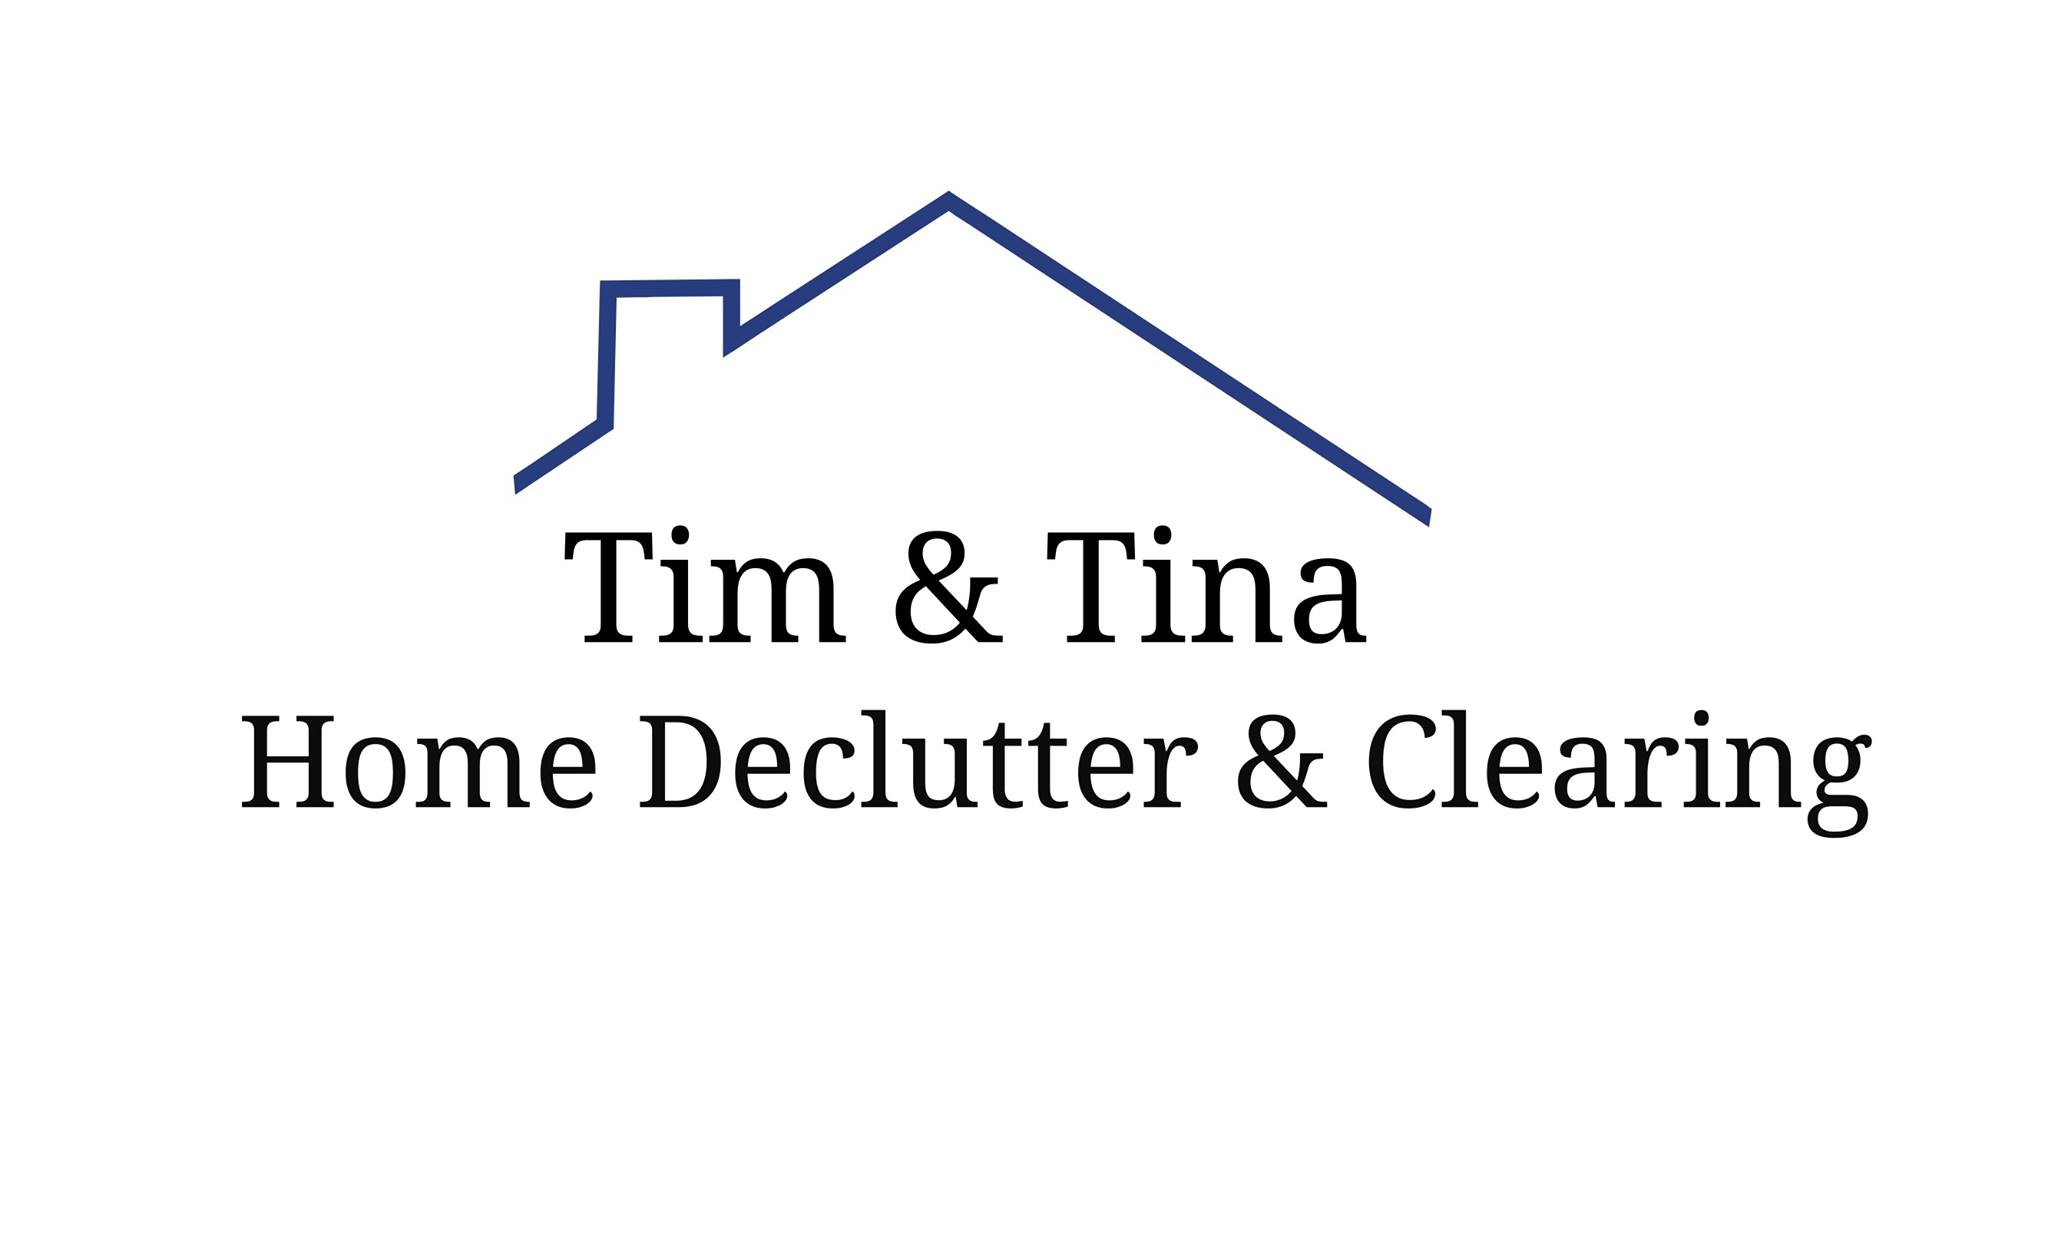 Tim and Tina Home Declutter and Clearing